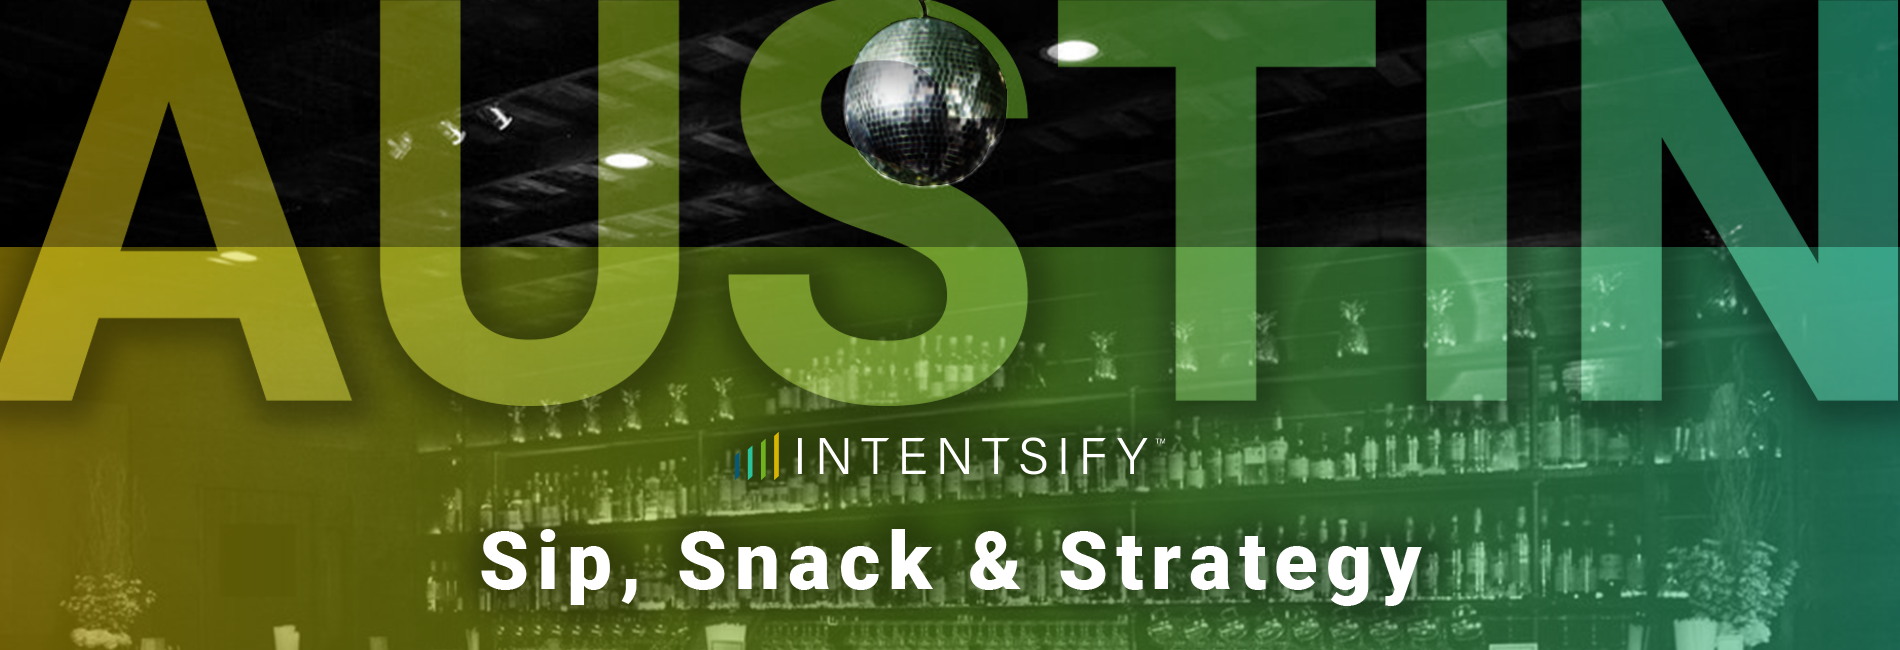 Sip, Snack & Strategy